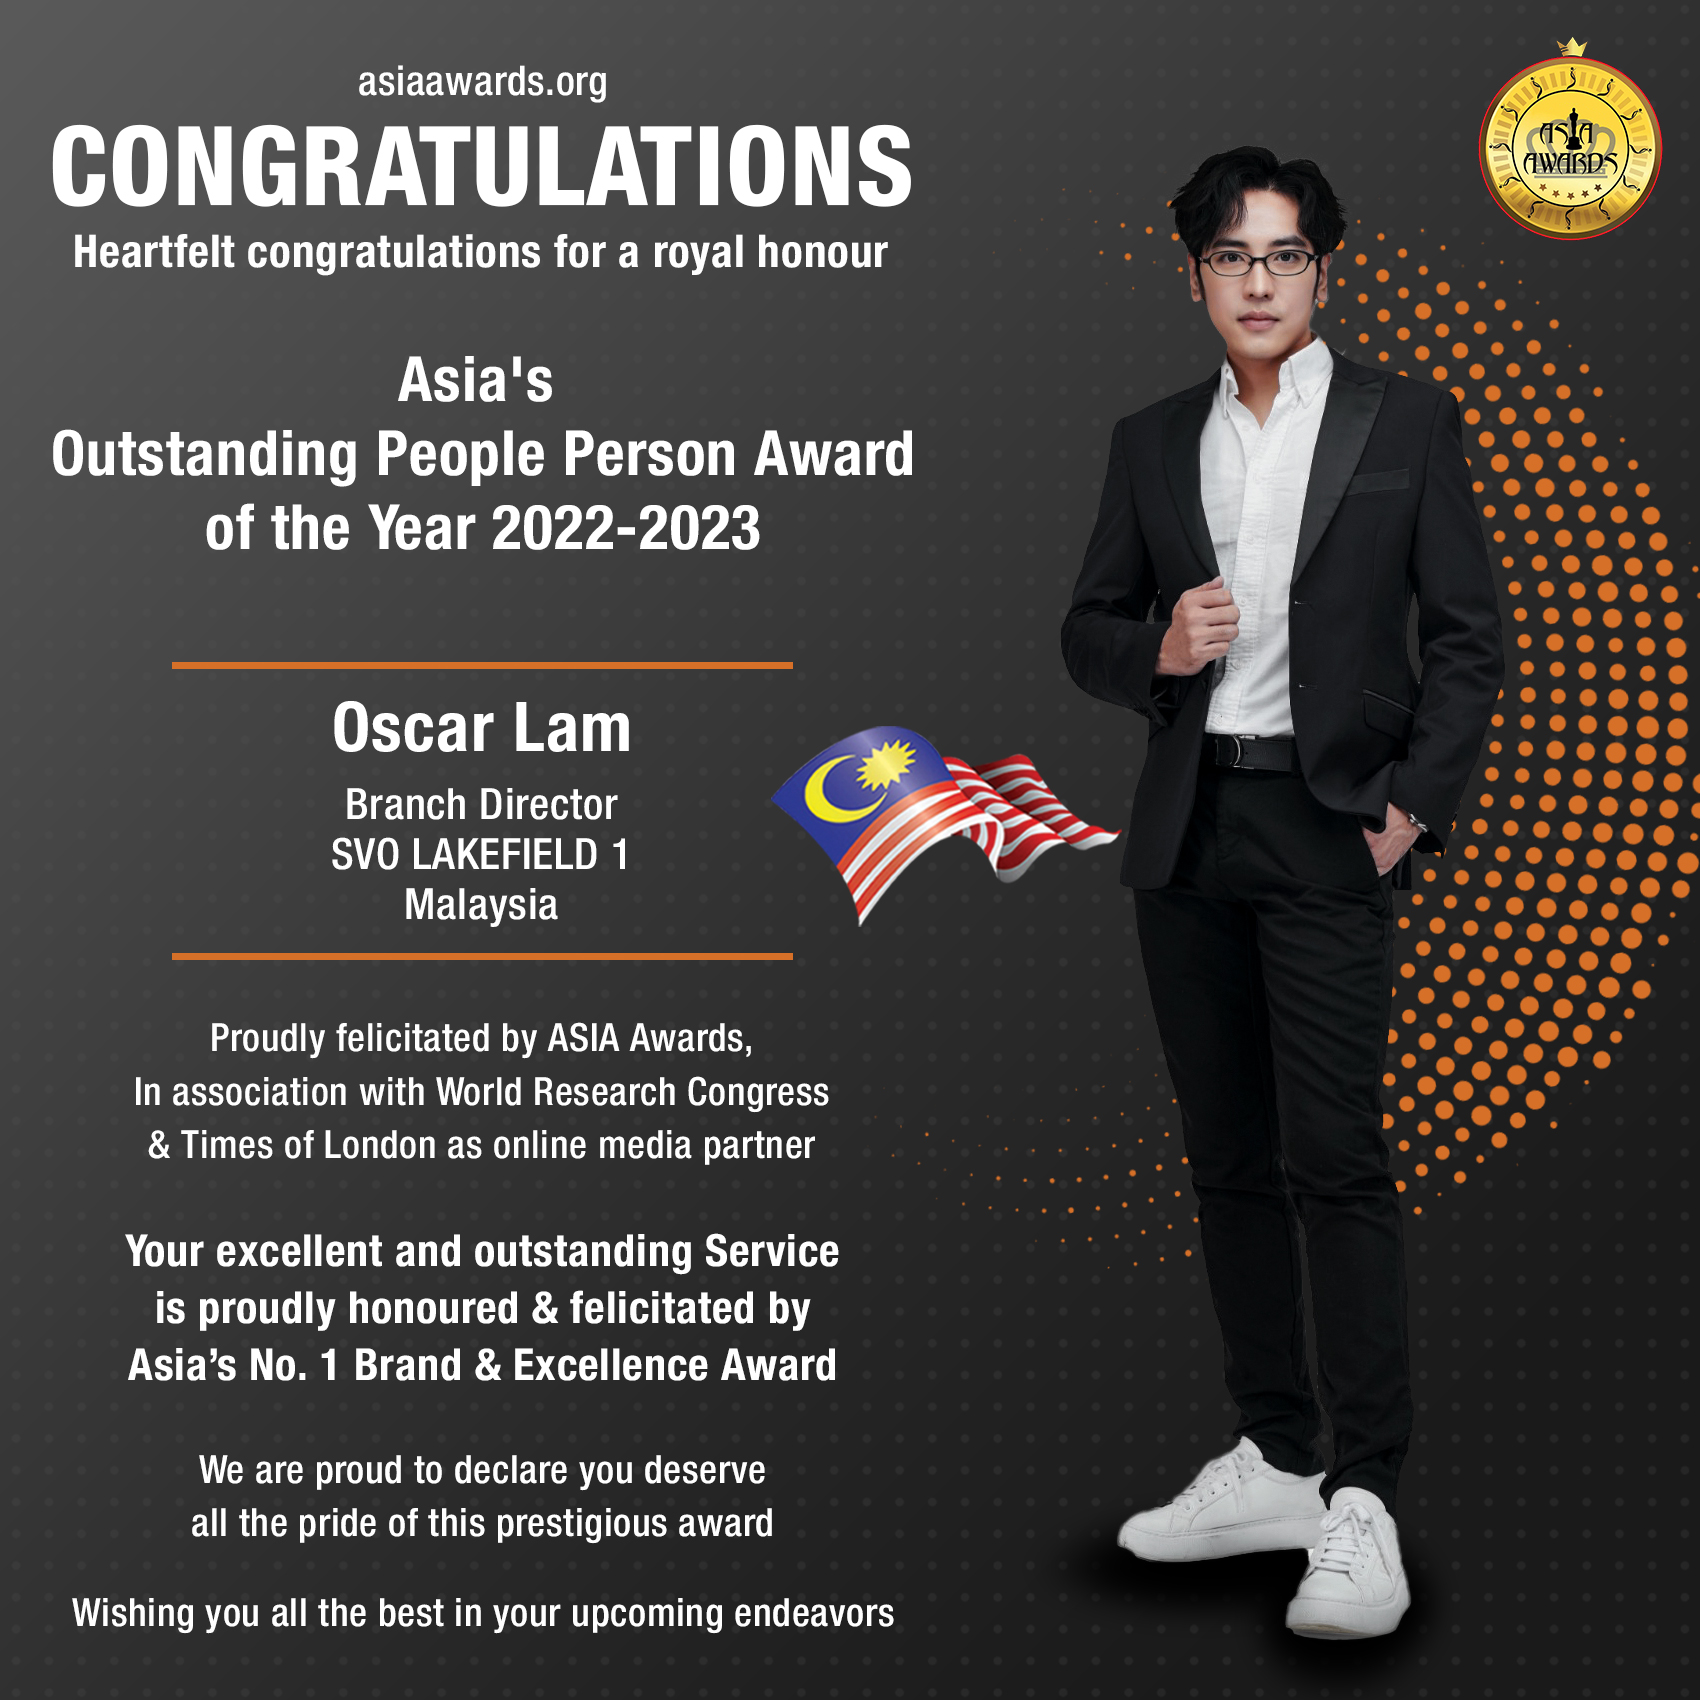 Oscar Lam Has bagged Asia's Outstanding People Person Award